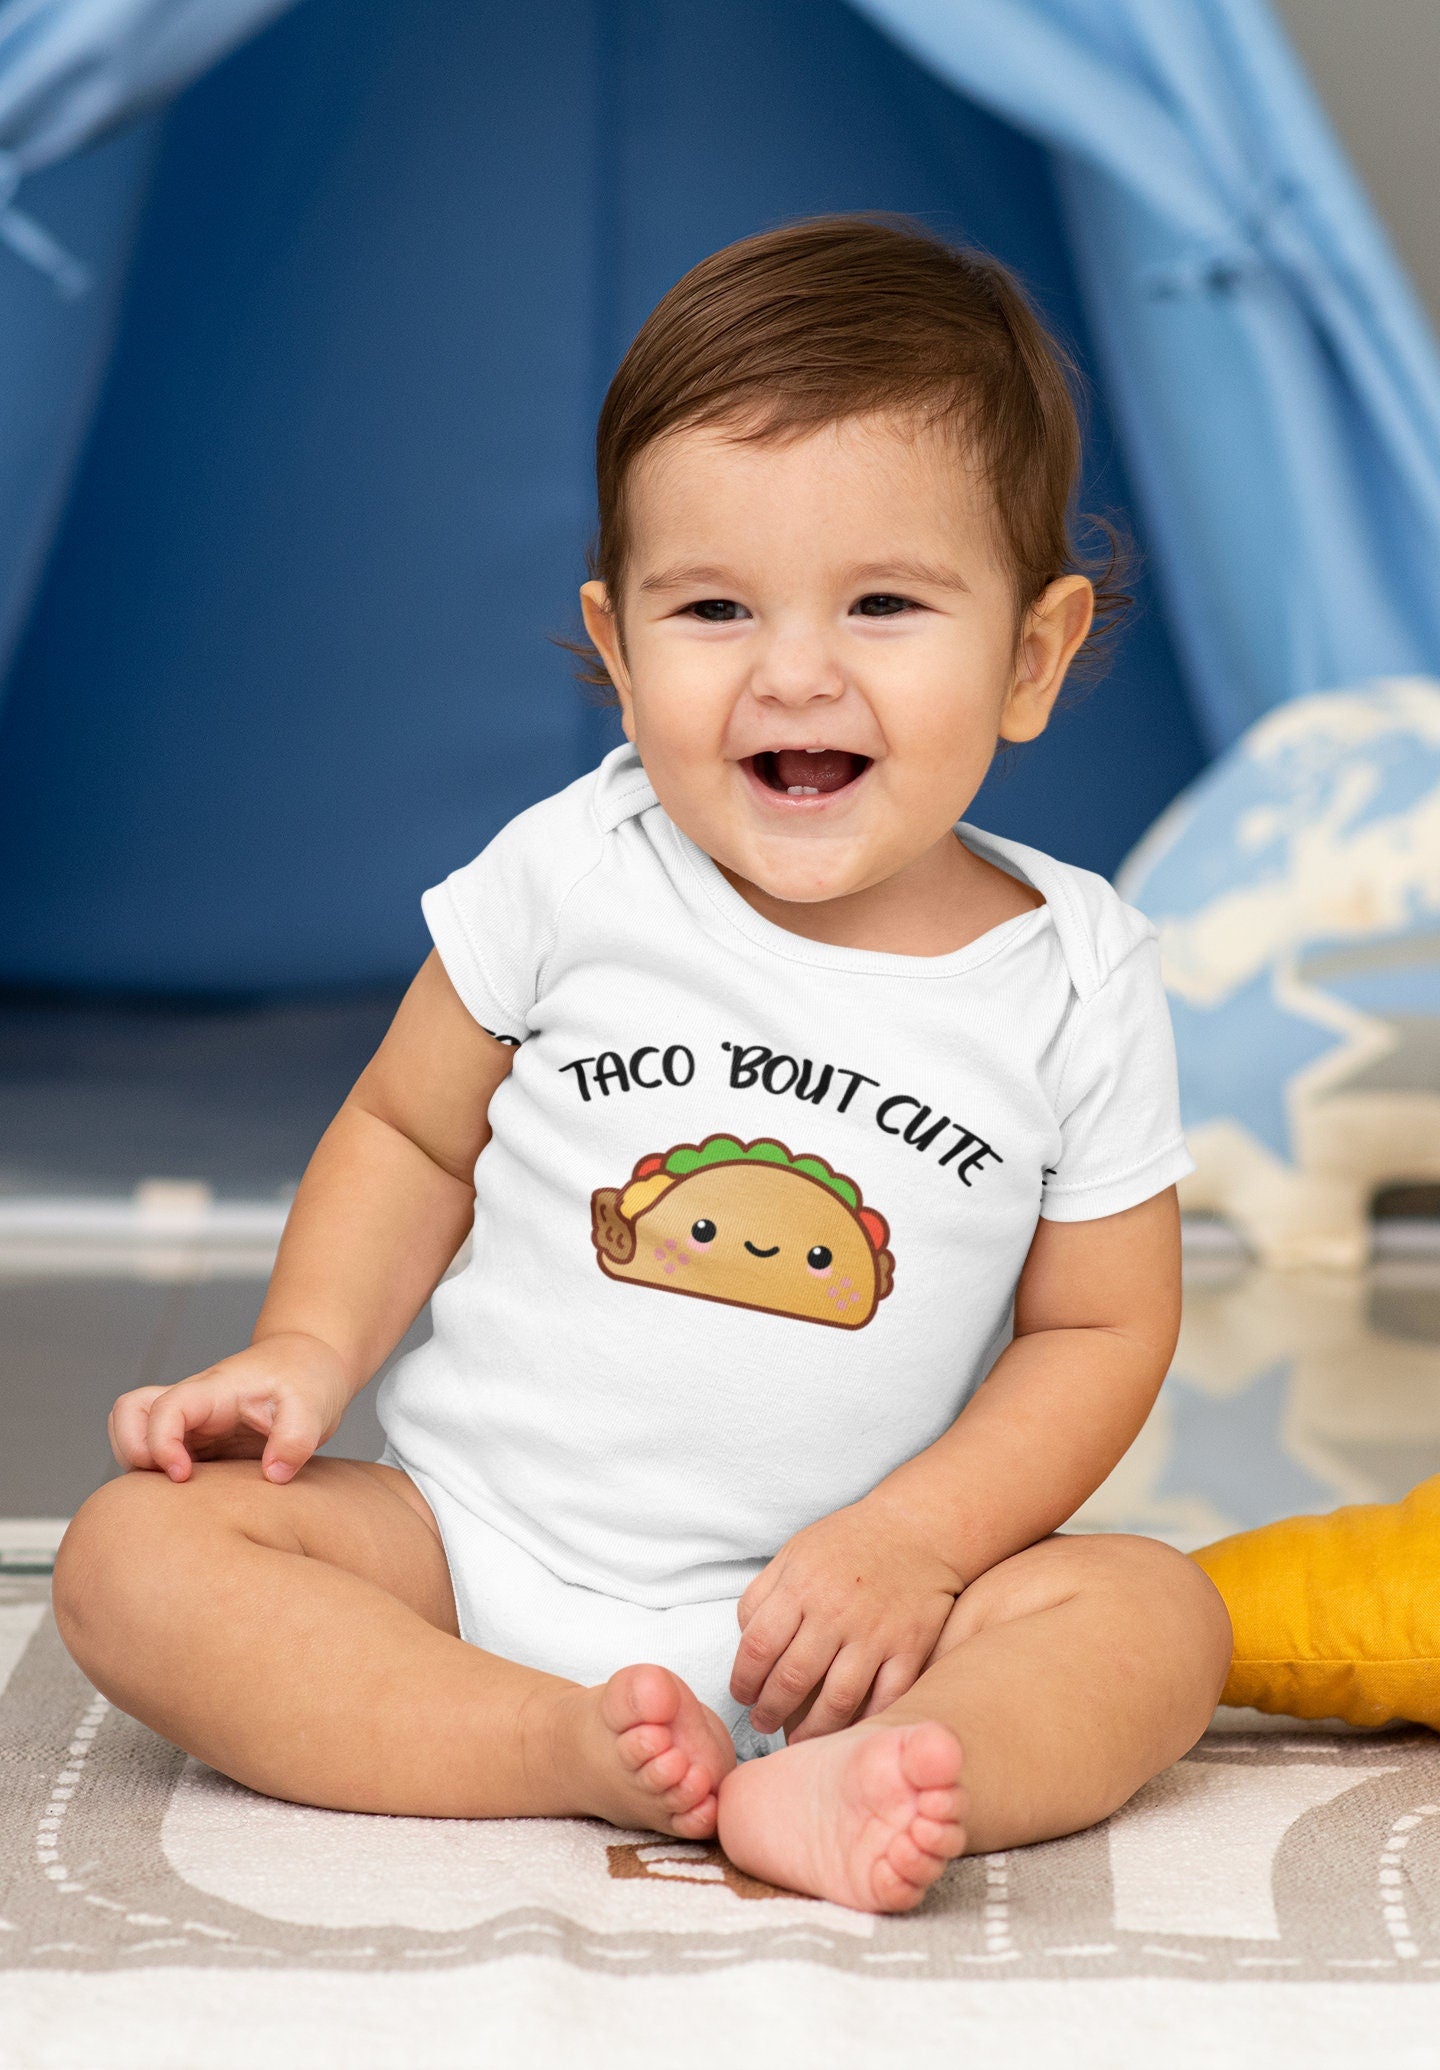 Taco Bout Cute, Cute Taco Baby Vest, Baby Grow